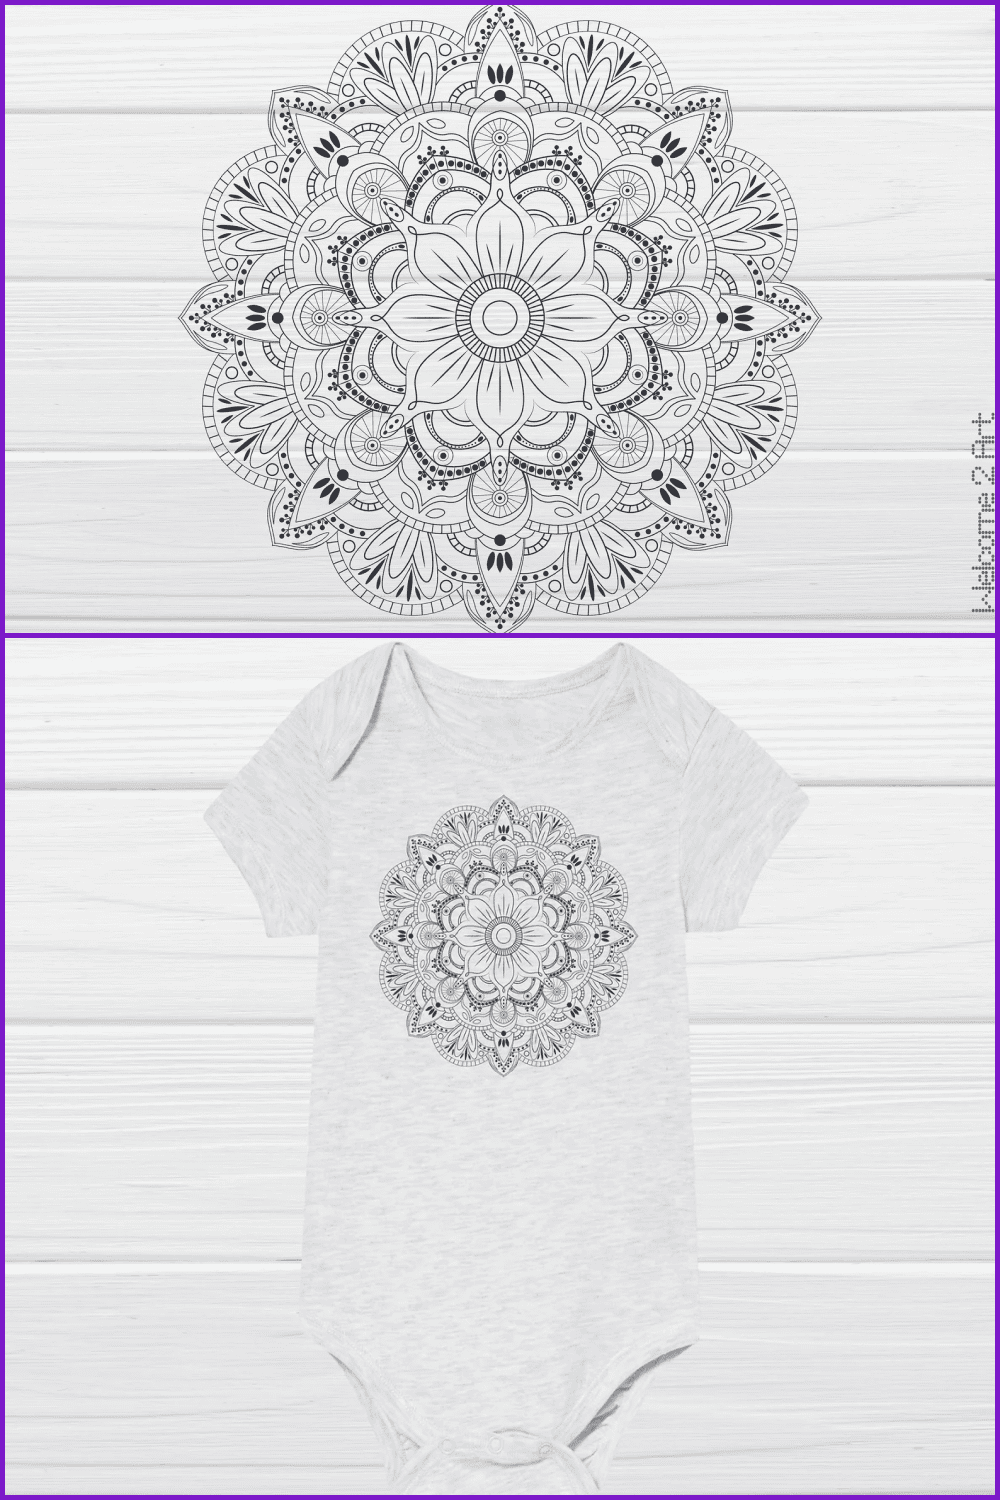 Gray mandala with drawings of flowers and dots. Looks smart and festive.